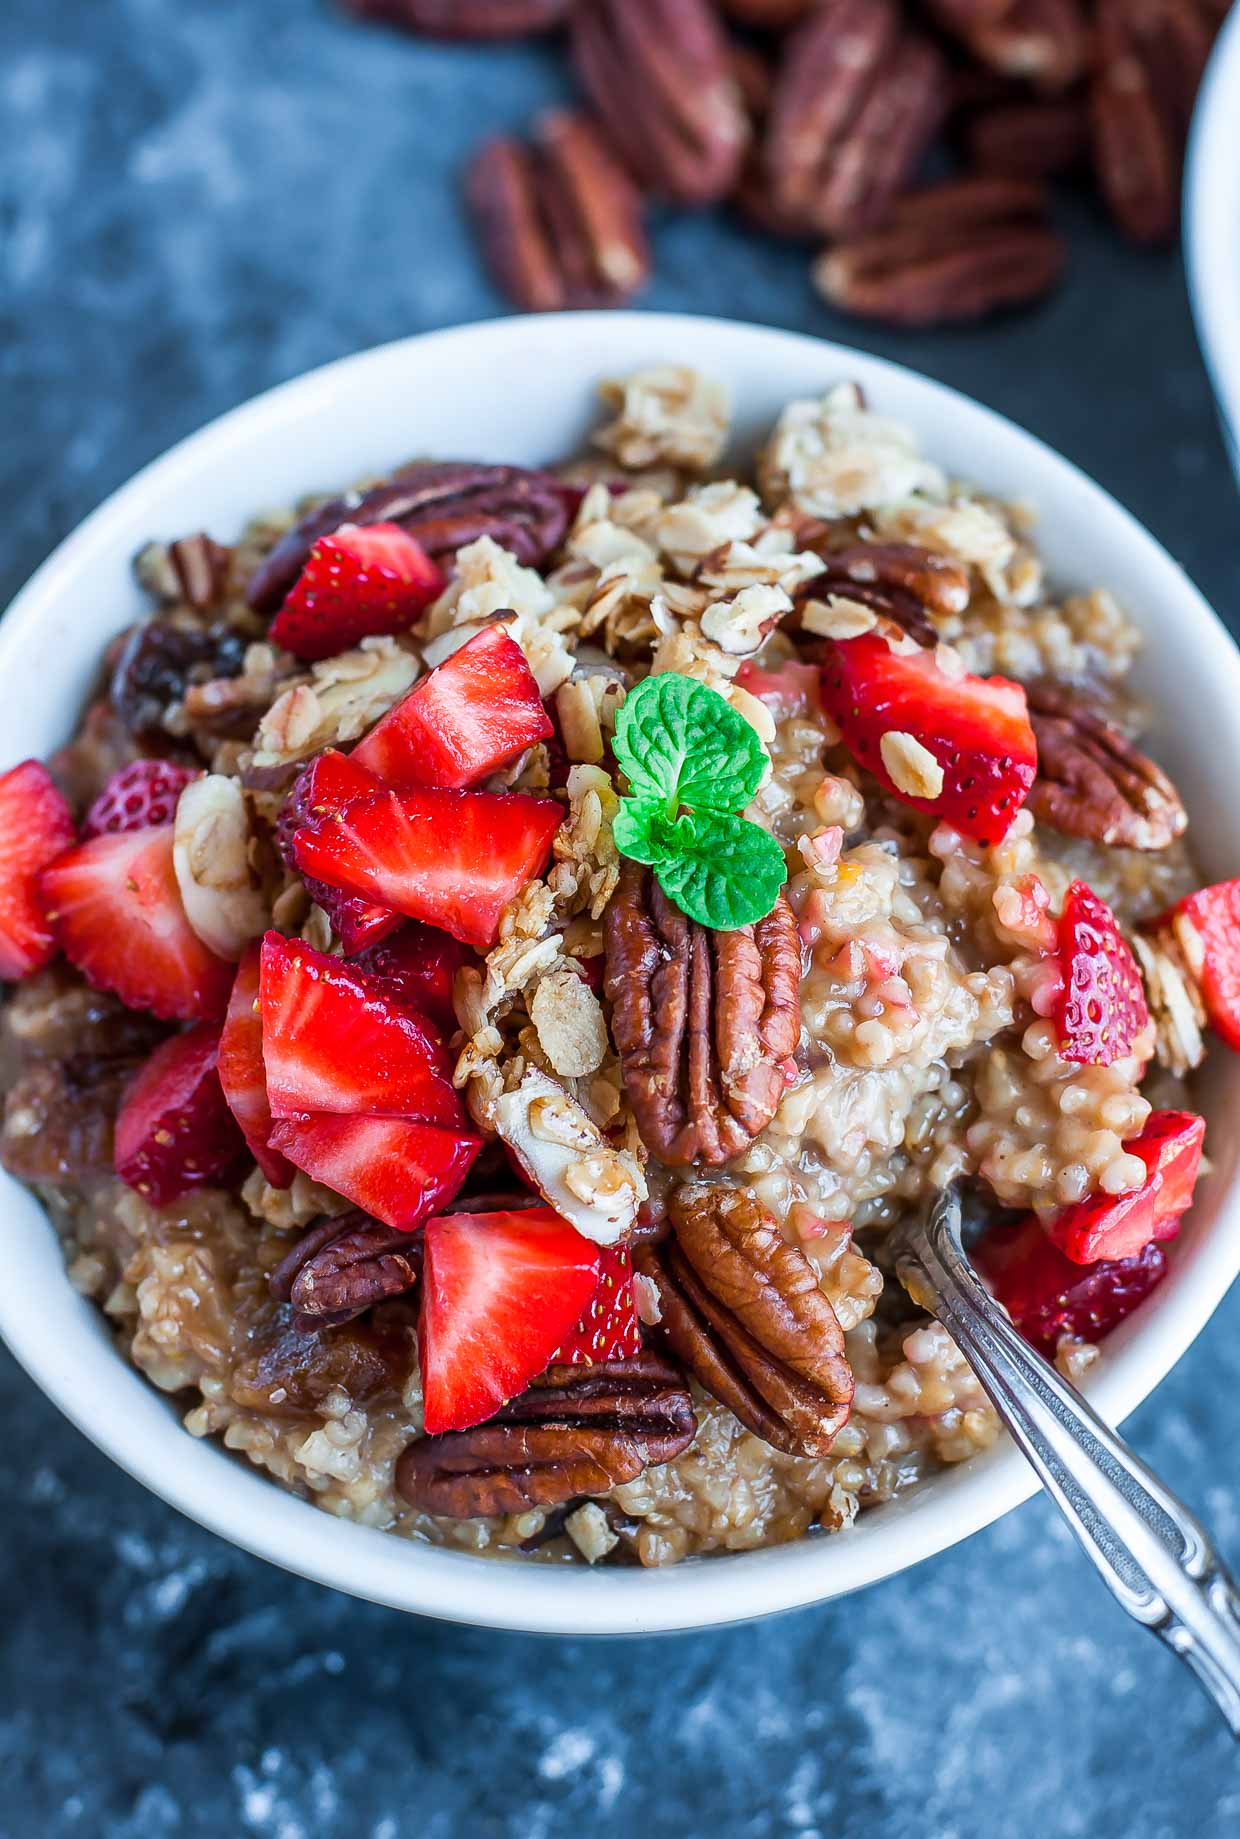 INSTANT POT STRAWBERRY TRAIL MIX OATMEAL